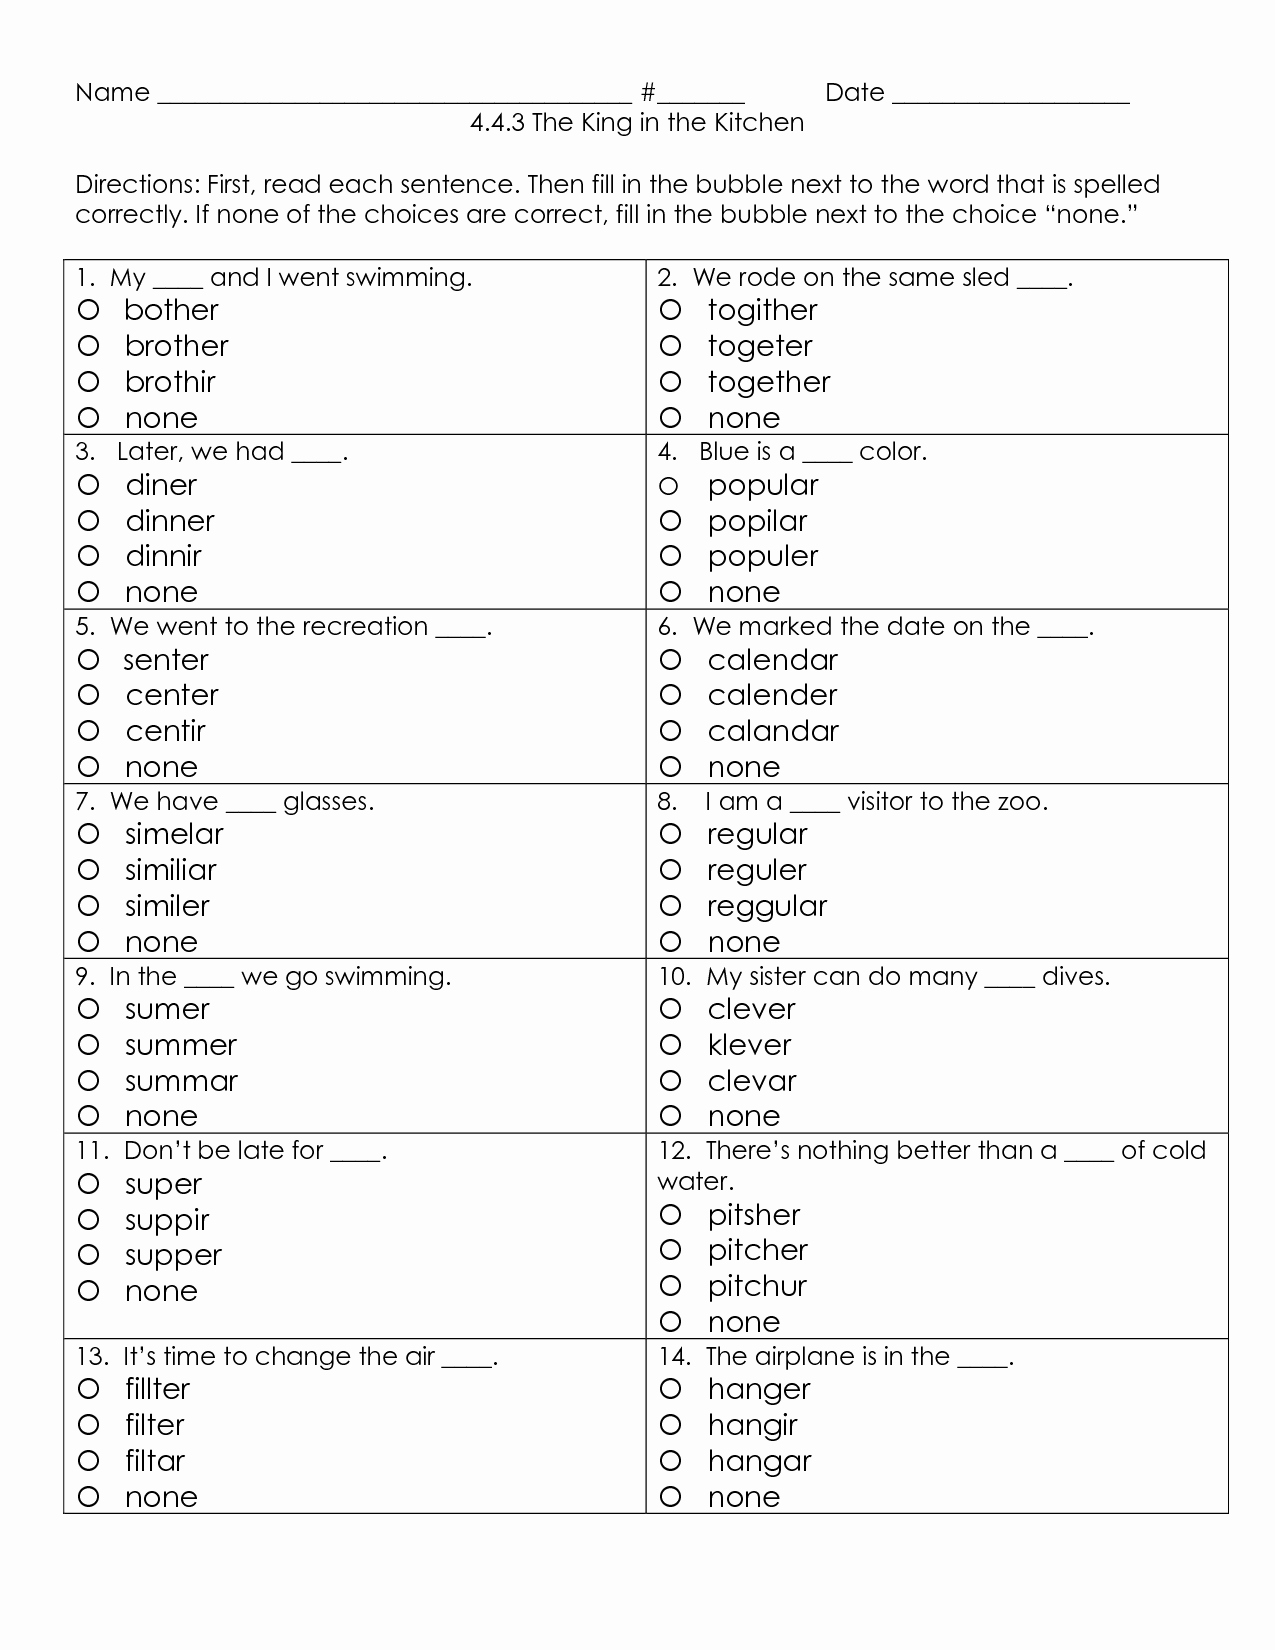 Multiple Choice Test Template Luxury 11 Best Of Multiple Choice Spelling Worksheets